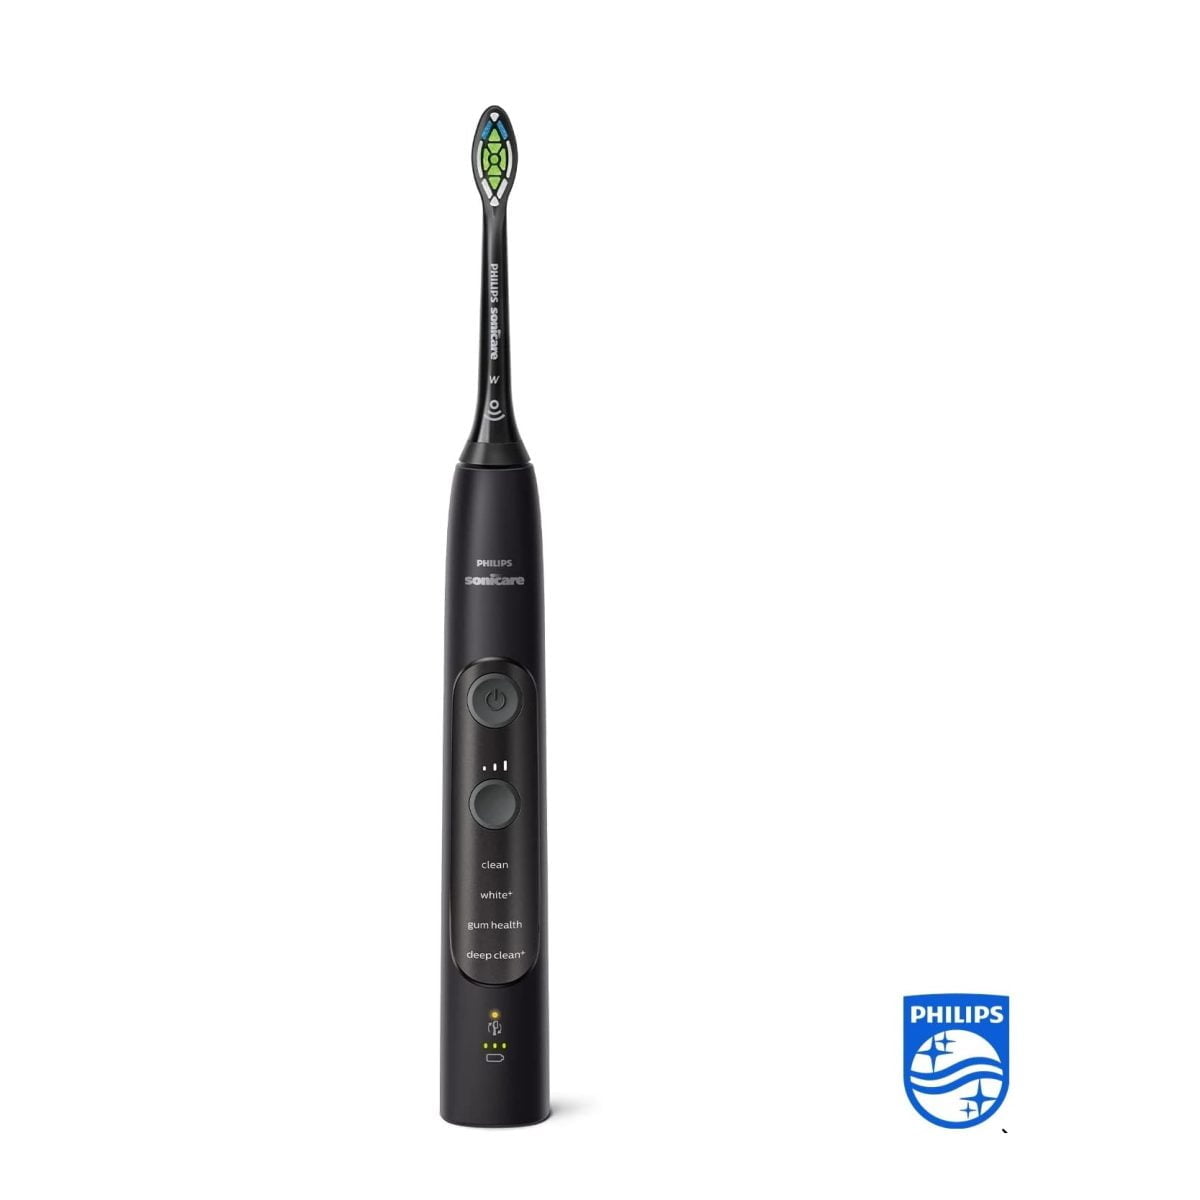 Philips Sonicare Series 7900 Electric Toothbrush - Hx9631